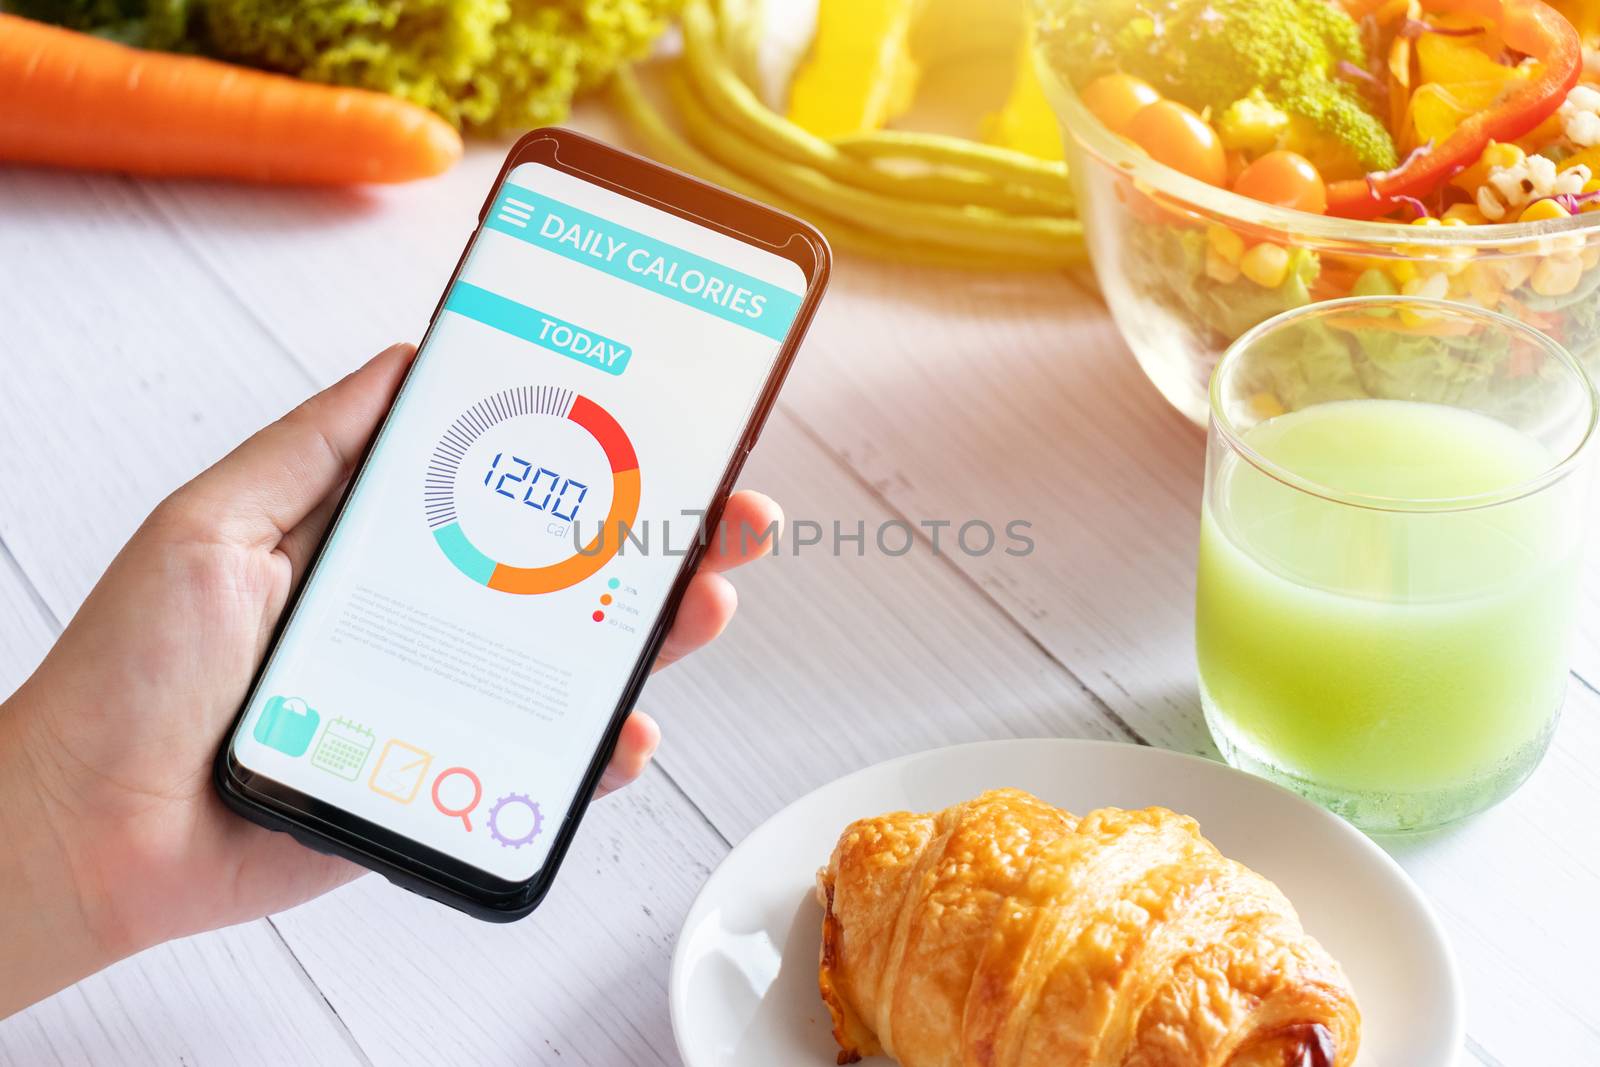 Calories counting and food control concept. woman using Calorie counter application on her smartphone with salad , vegetable, juice and croissant on dining table by asiandelight